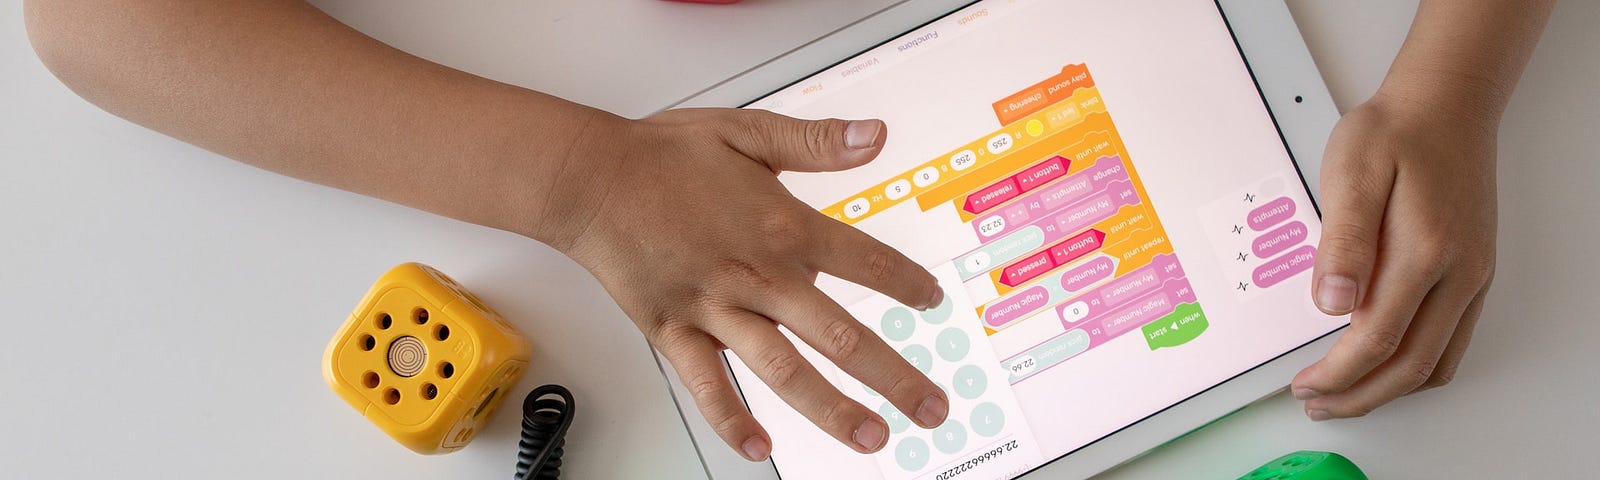 IMAGE: Two hands of a kid programming with intuitive tools (Scratch, from MIT) on a tablet